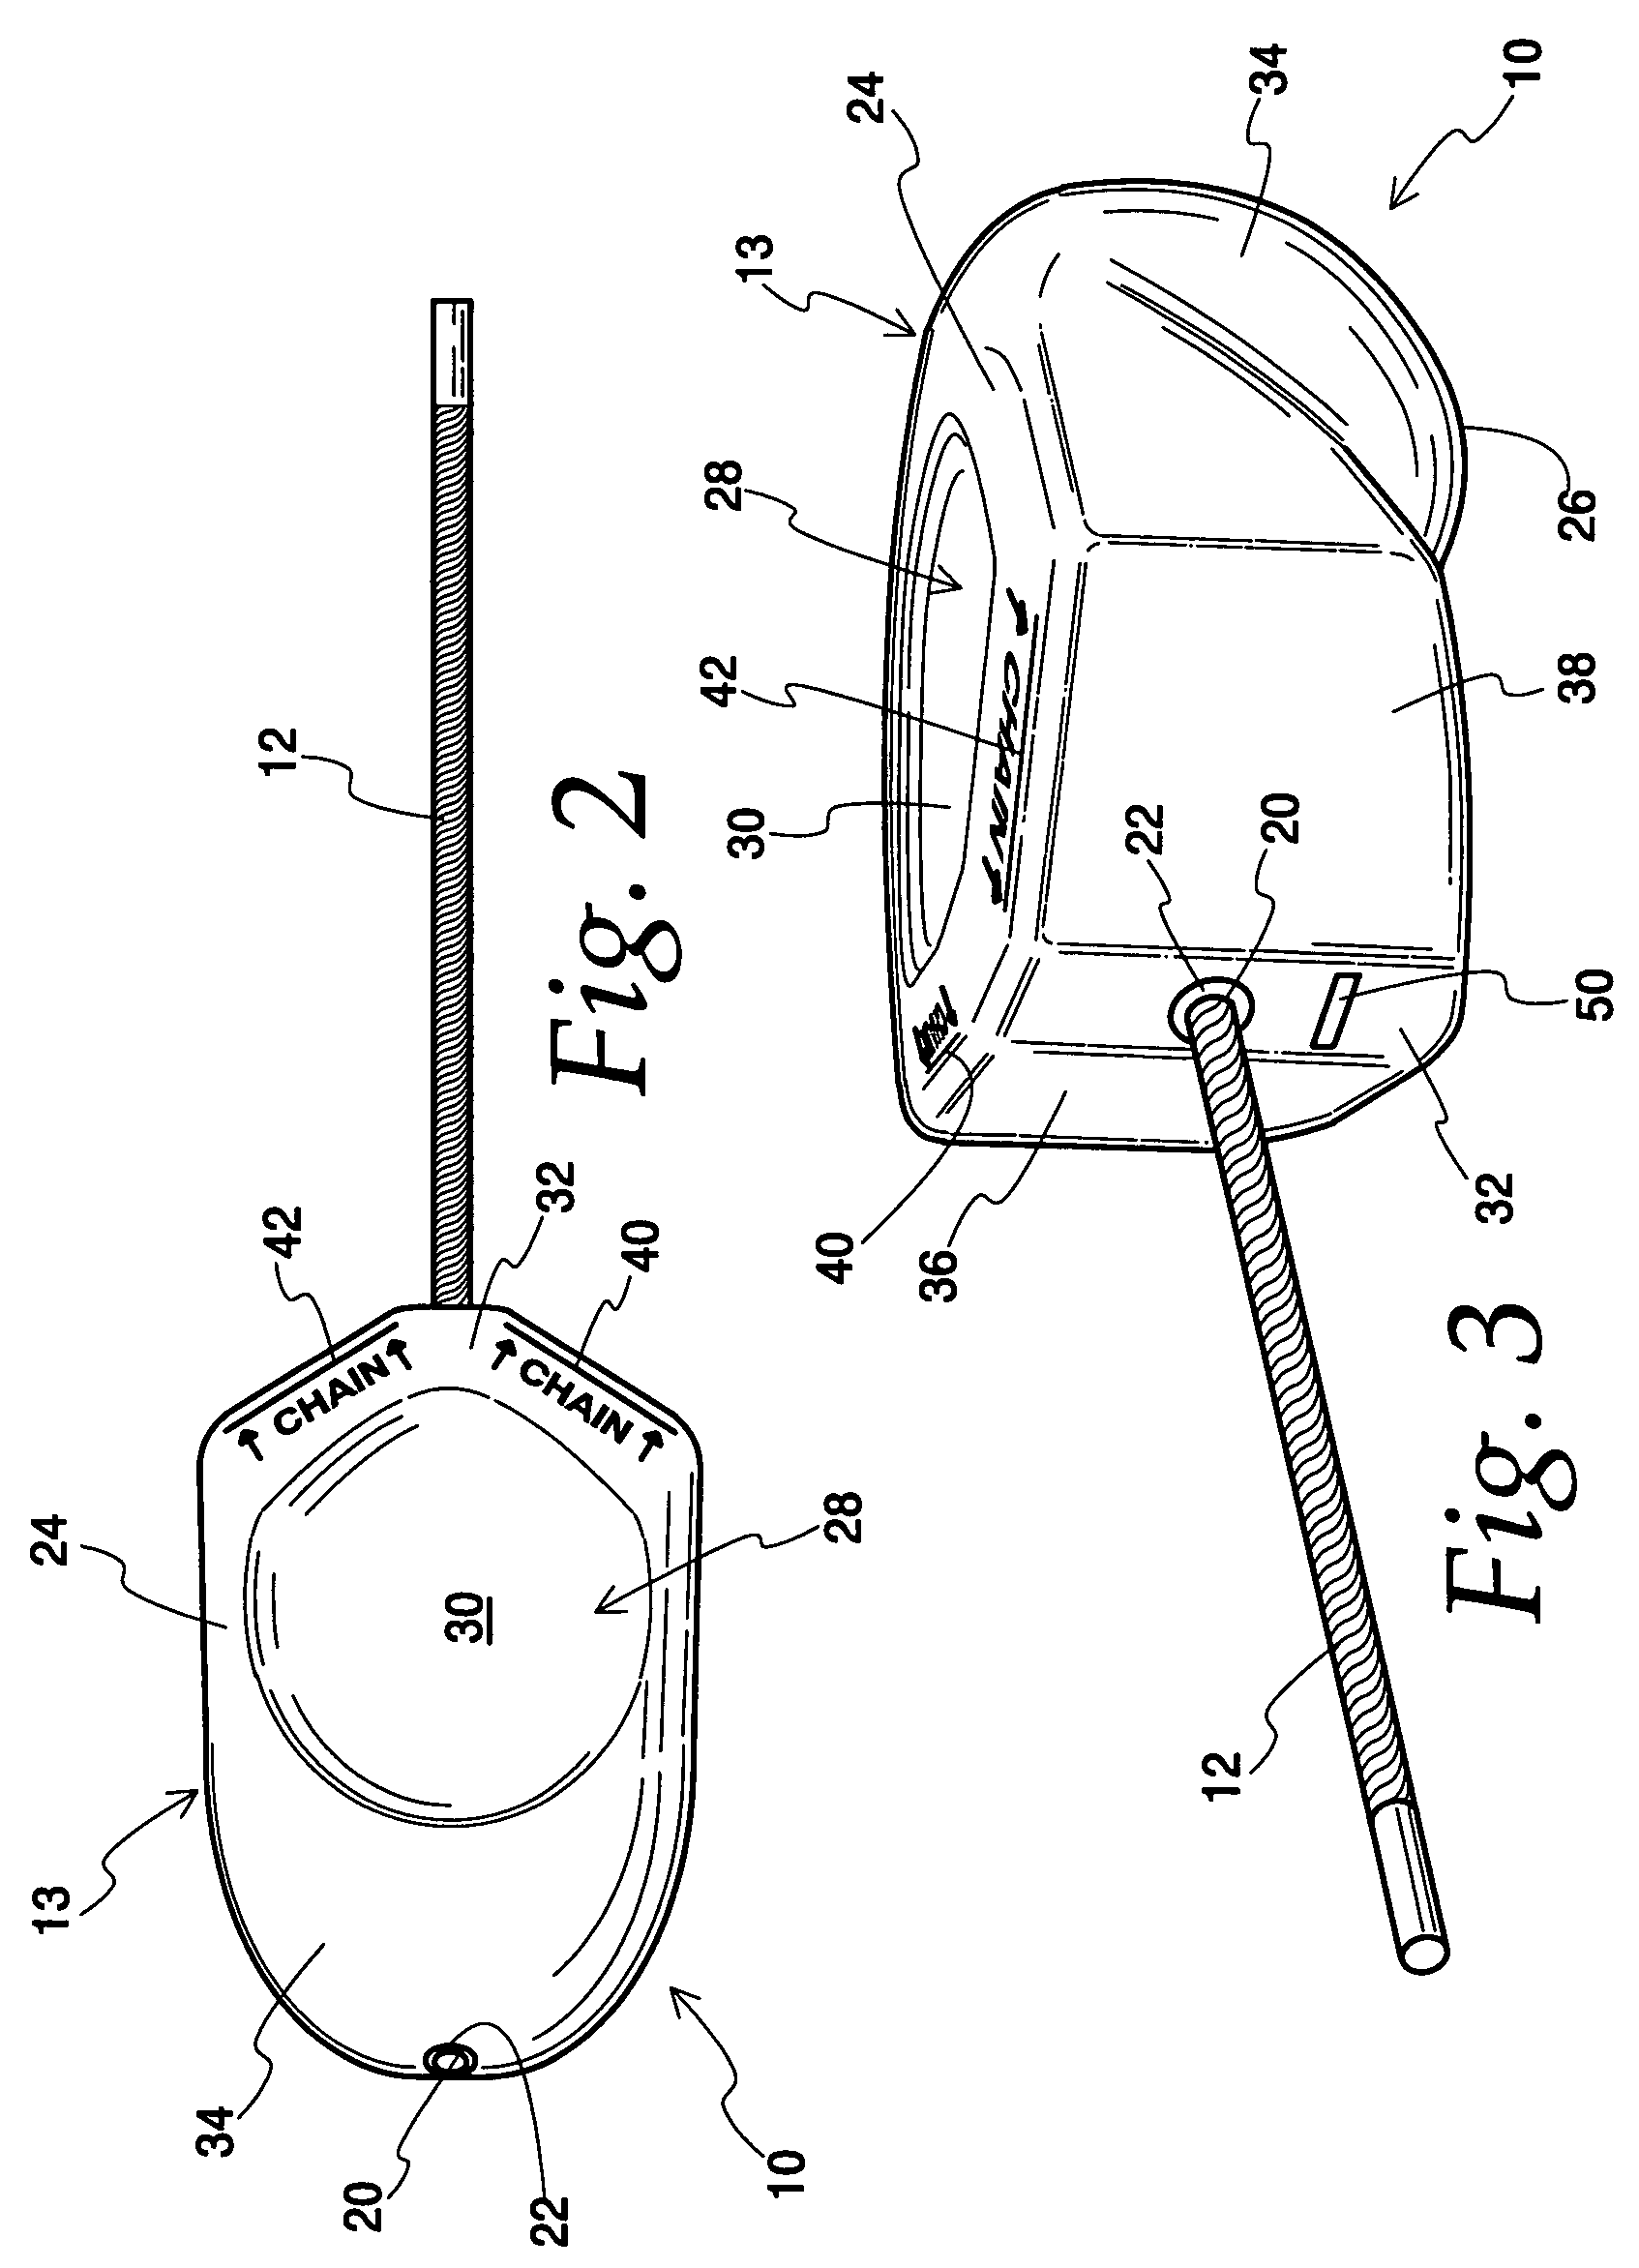 Ergonomic handle for a hand-held tool